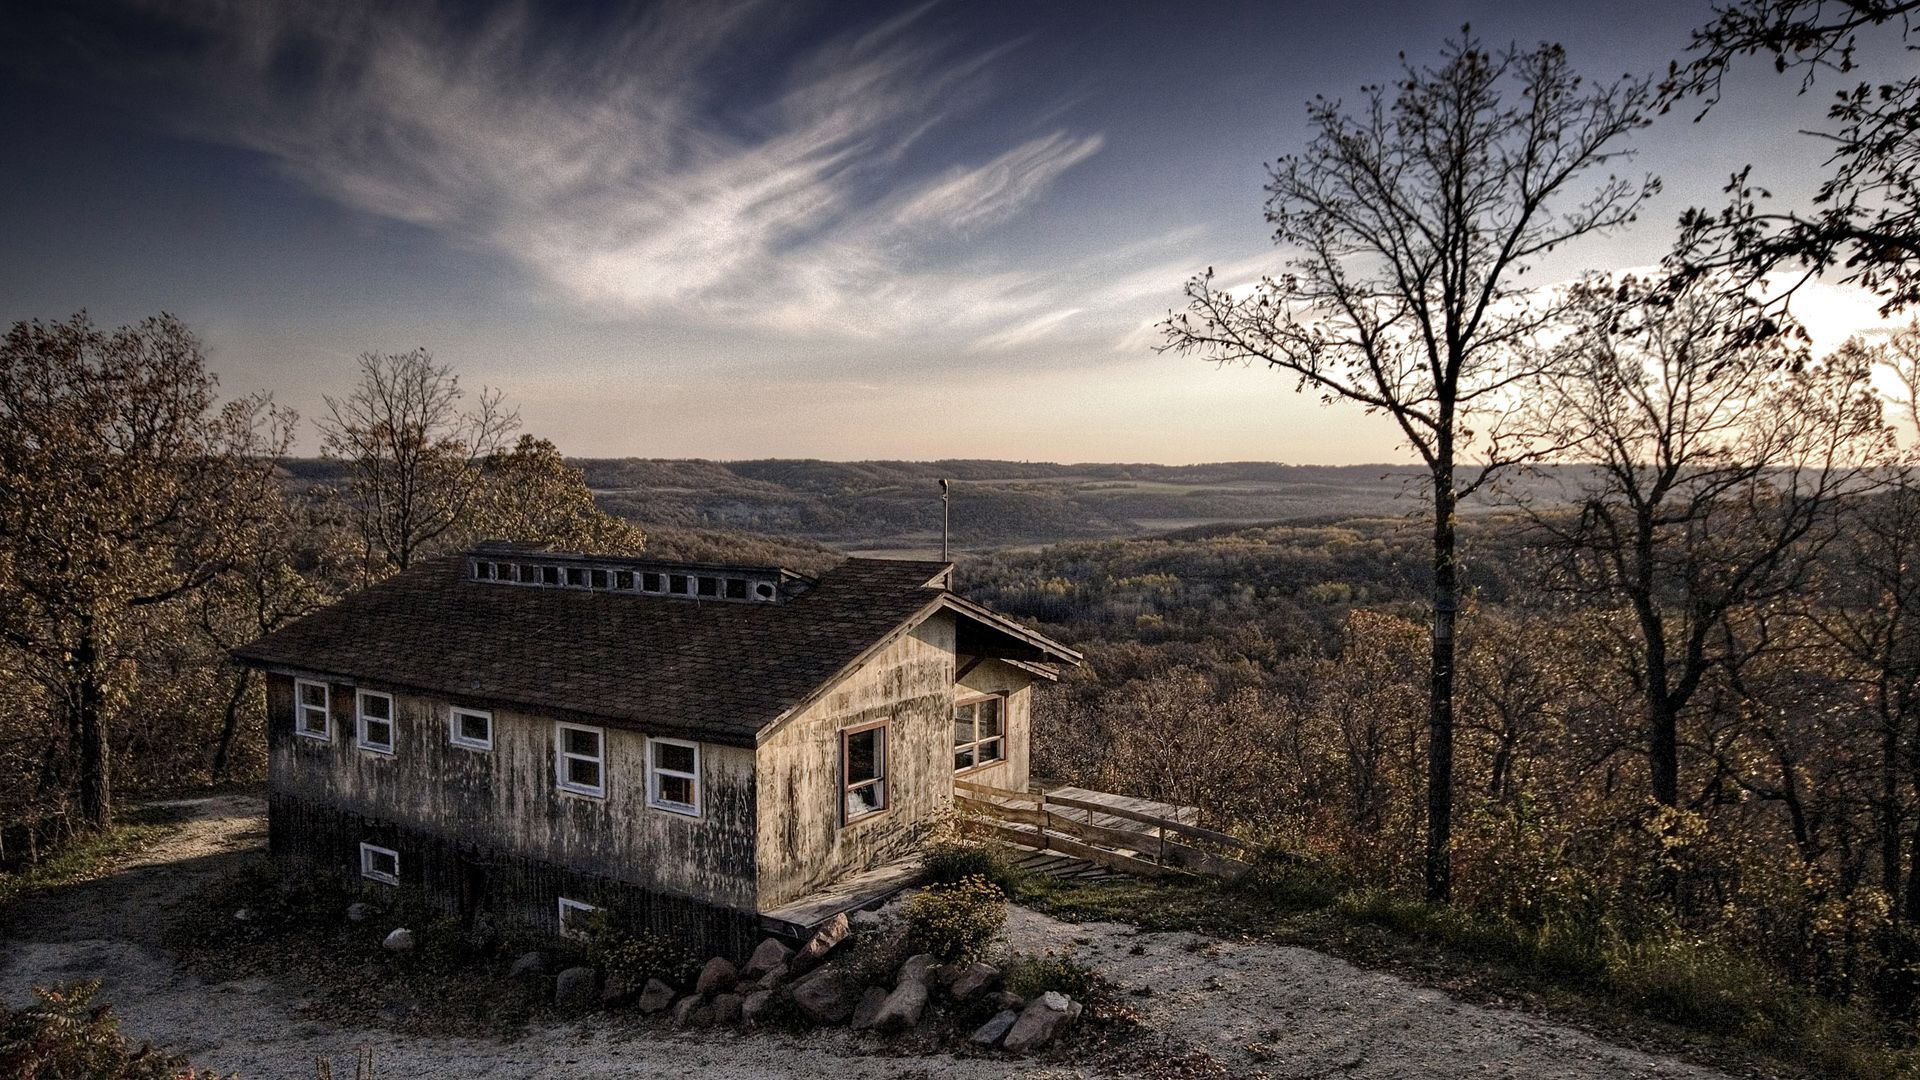 Abandoned House widescreen wallpaper. House in nature, Old farm houses, Old houses